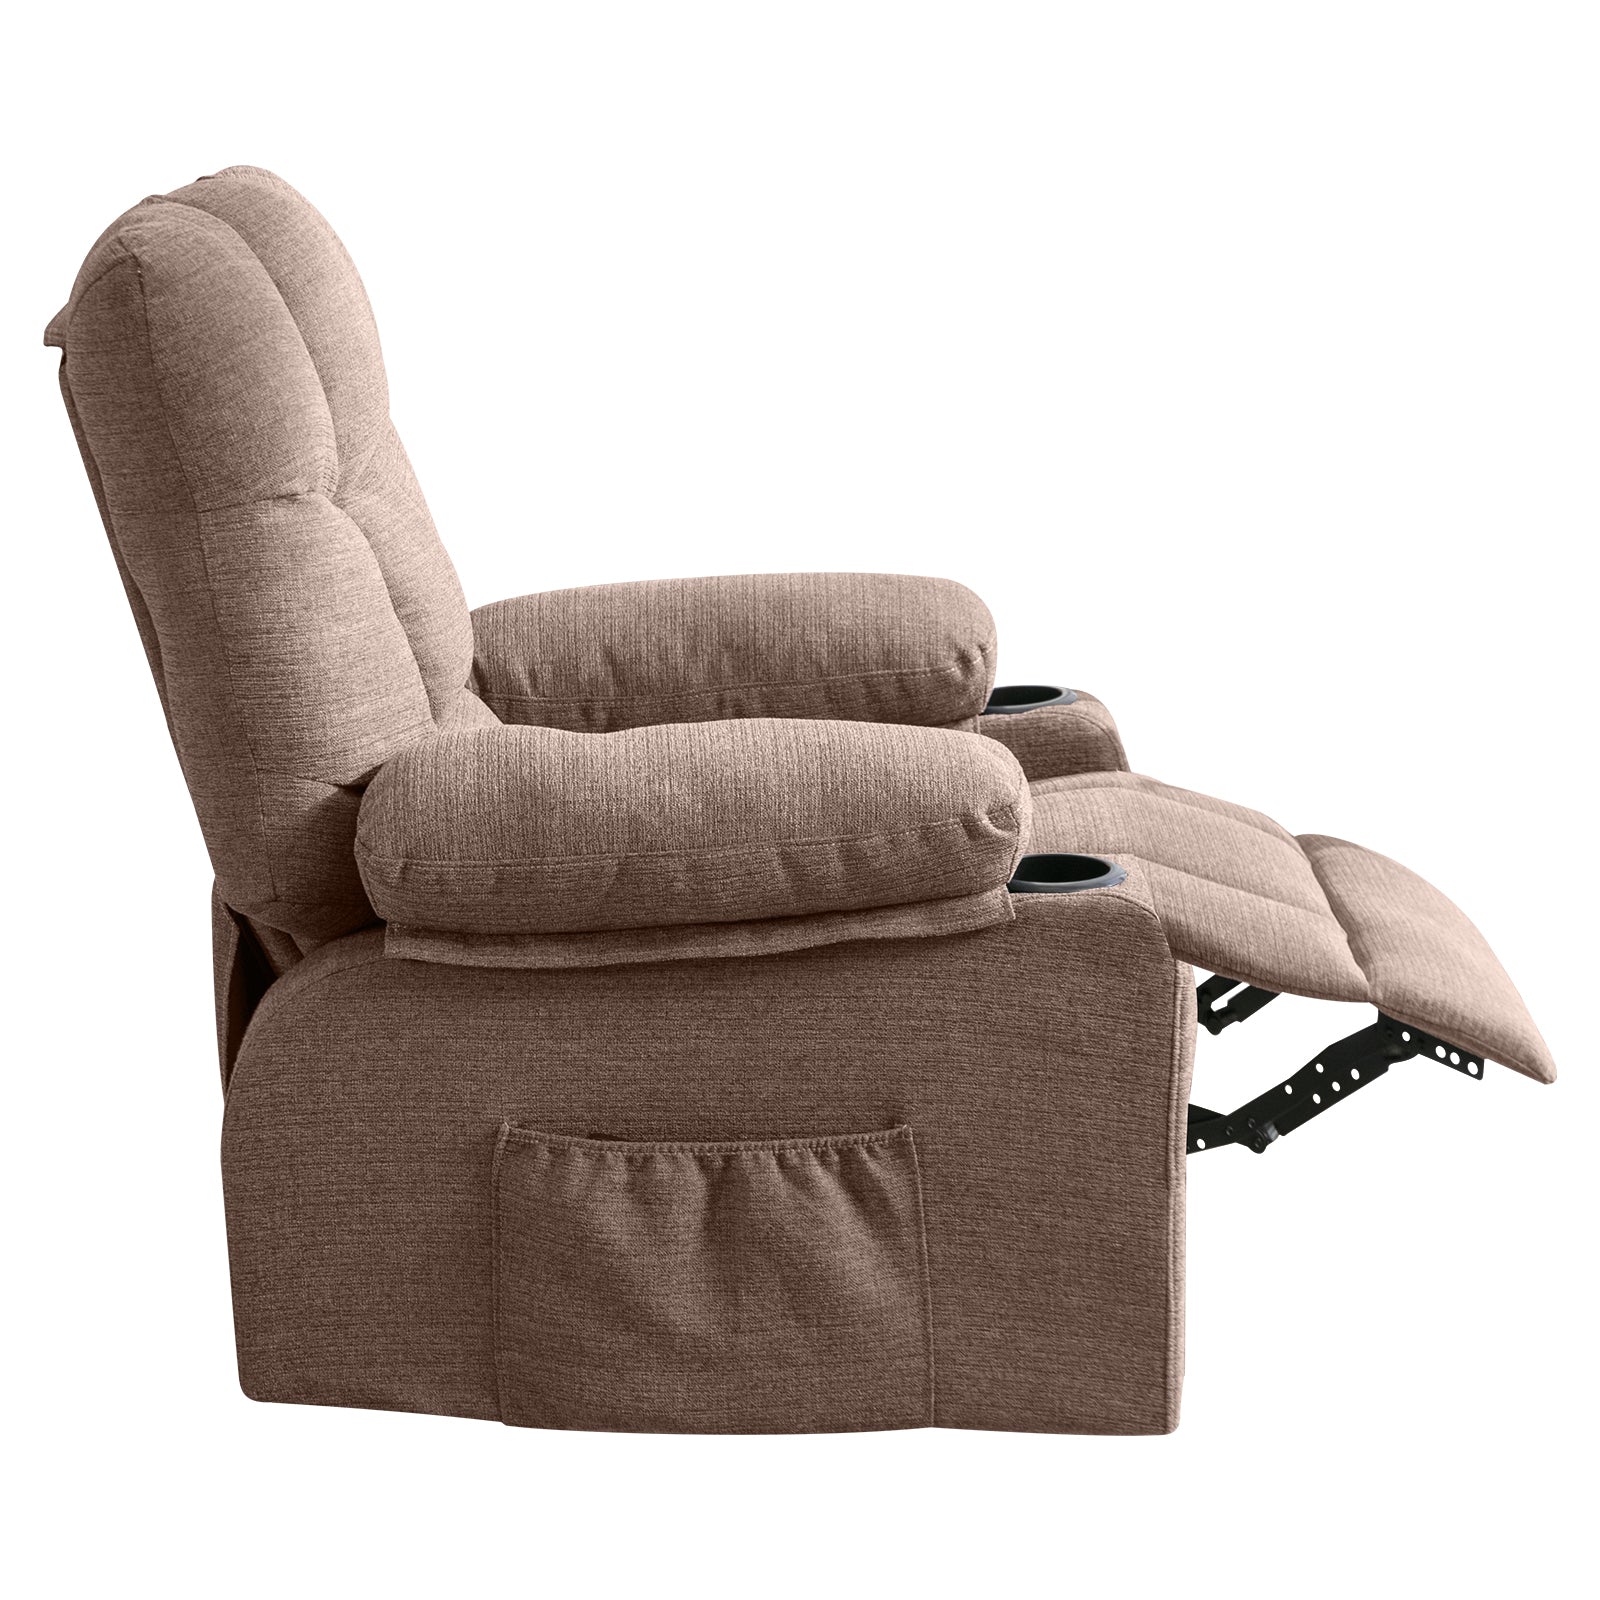 Neal Brown Fabric Recliner Chair With Cup Holders, Massage and Heat, USB and Side Pocket